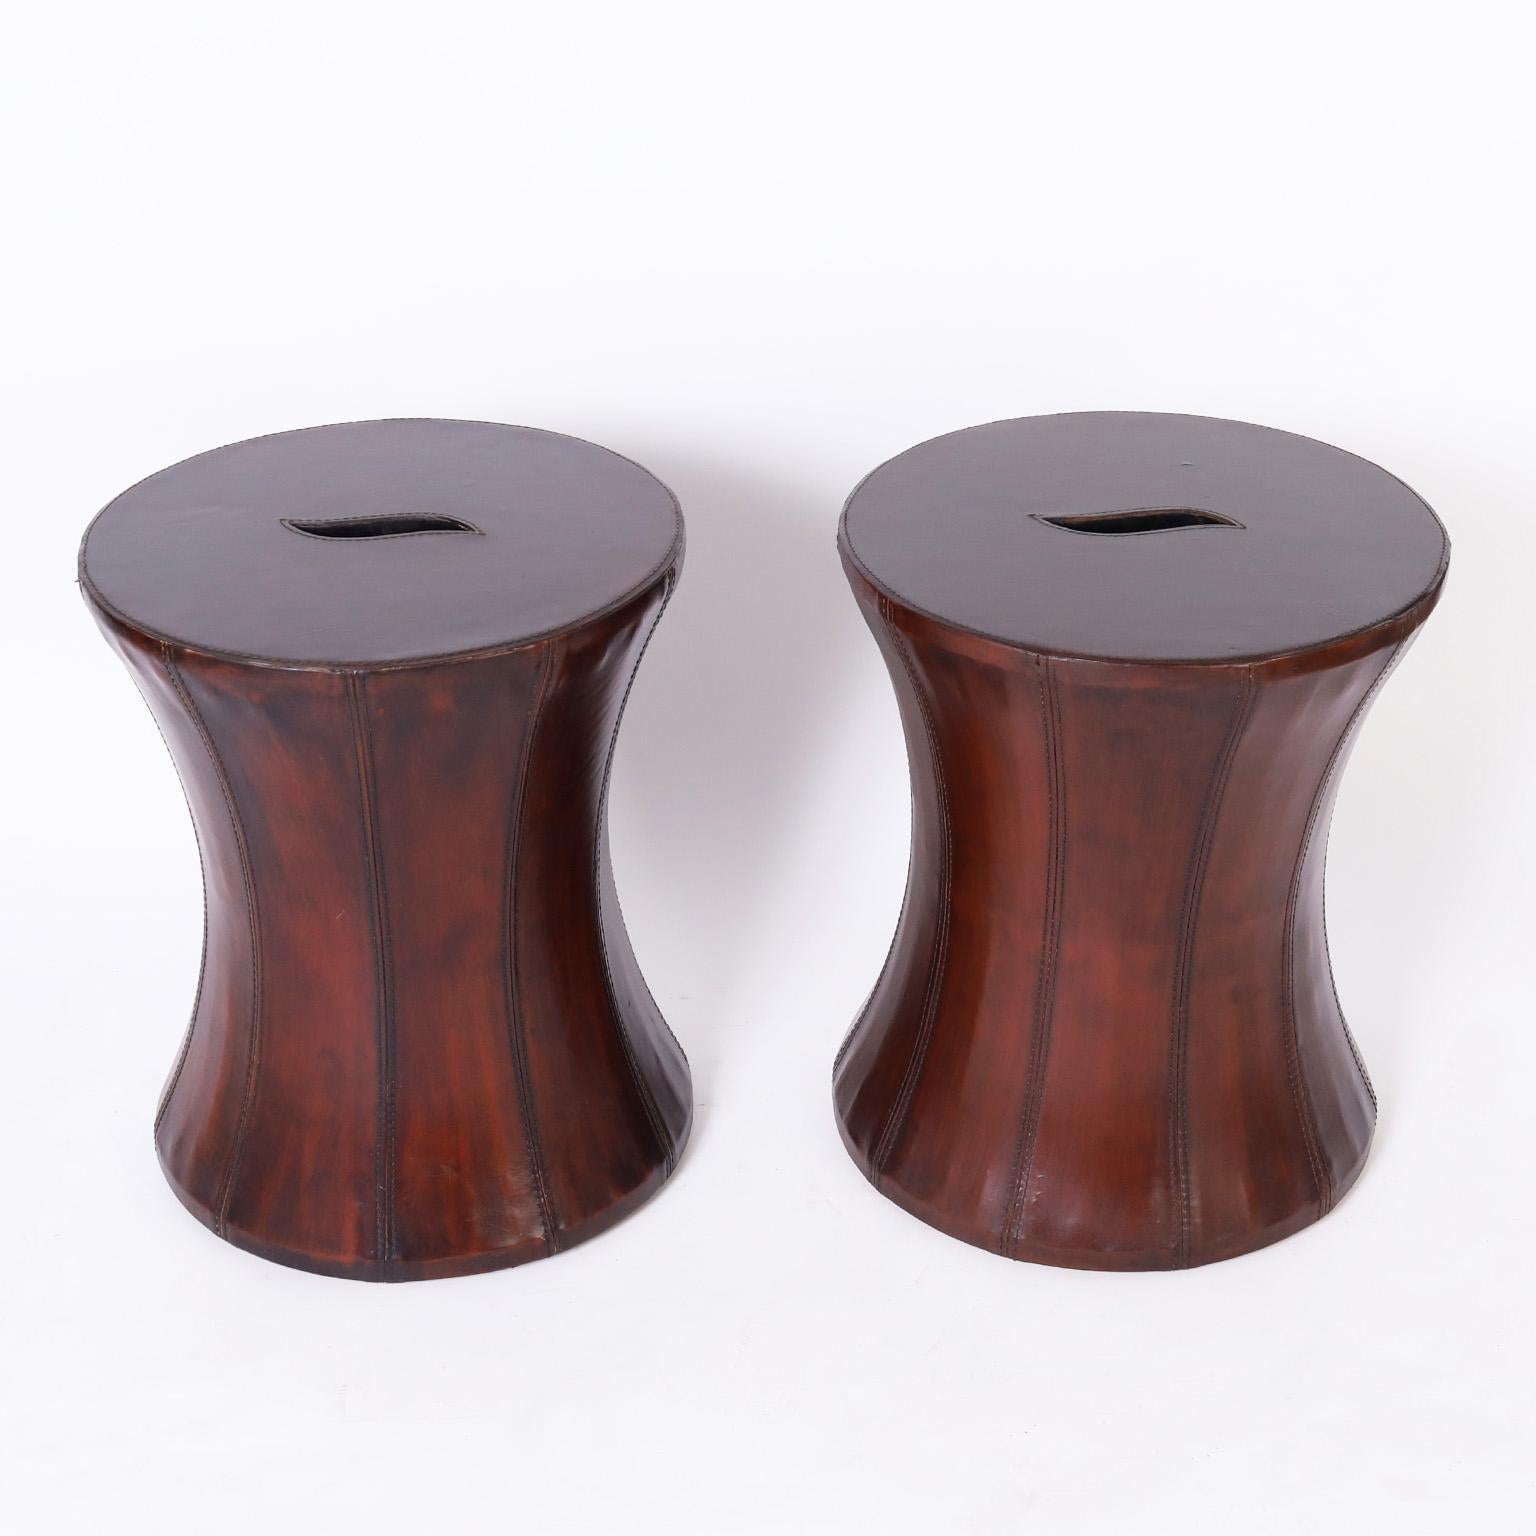 Unusual pair of seats or stands crafted with wood frames in a classic hourglass form and clad in lush brown leather.